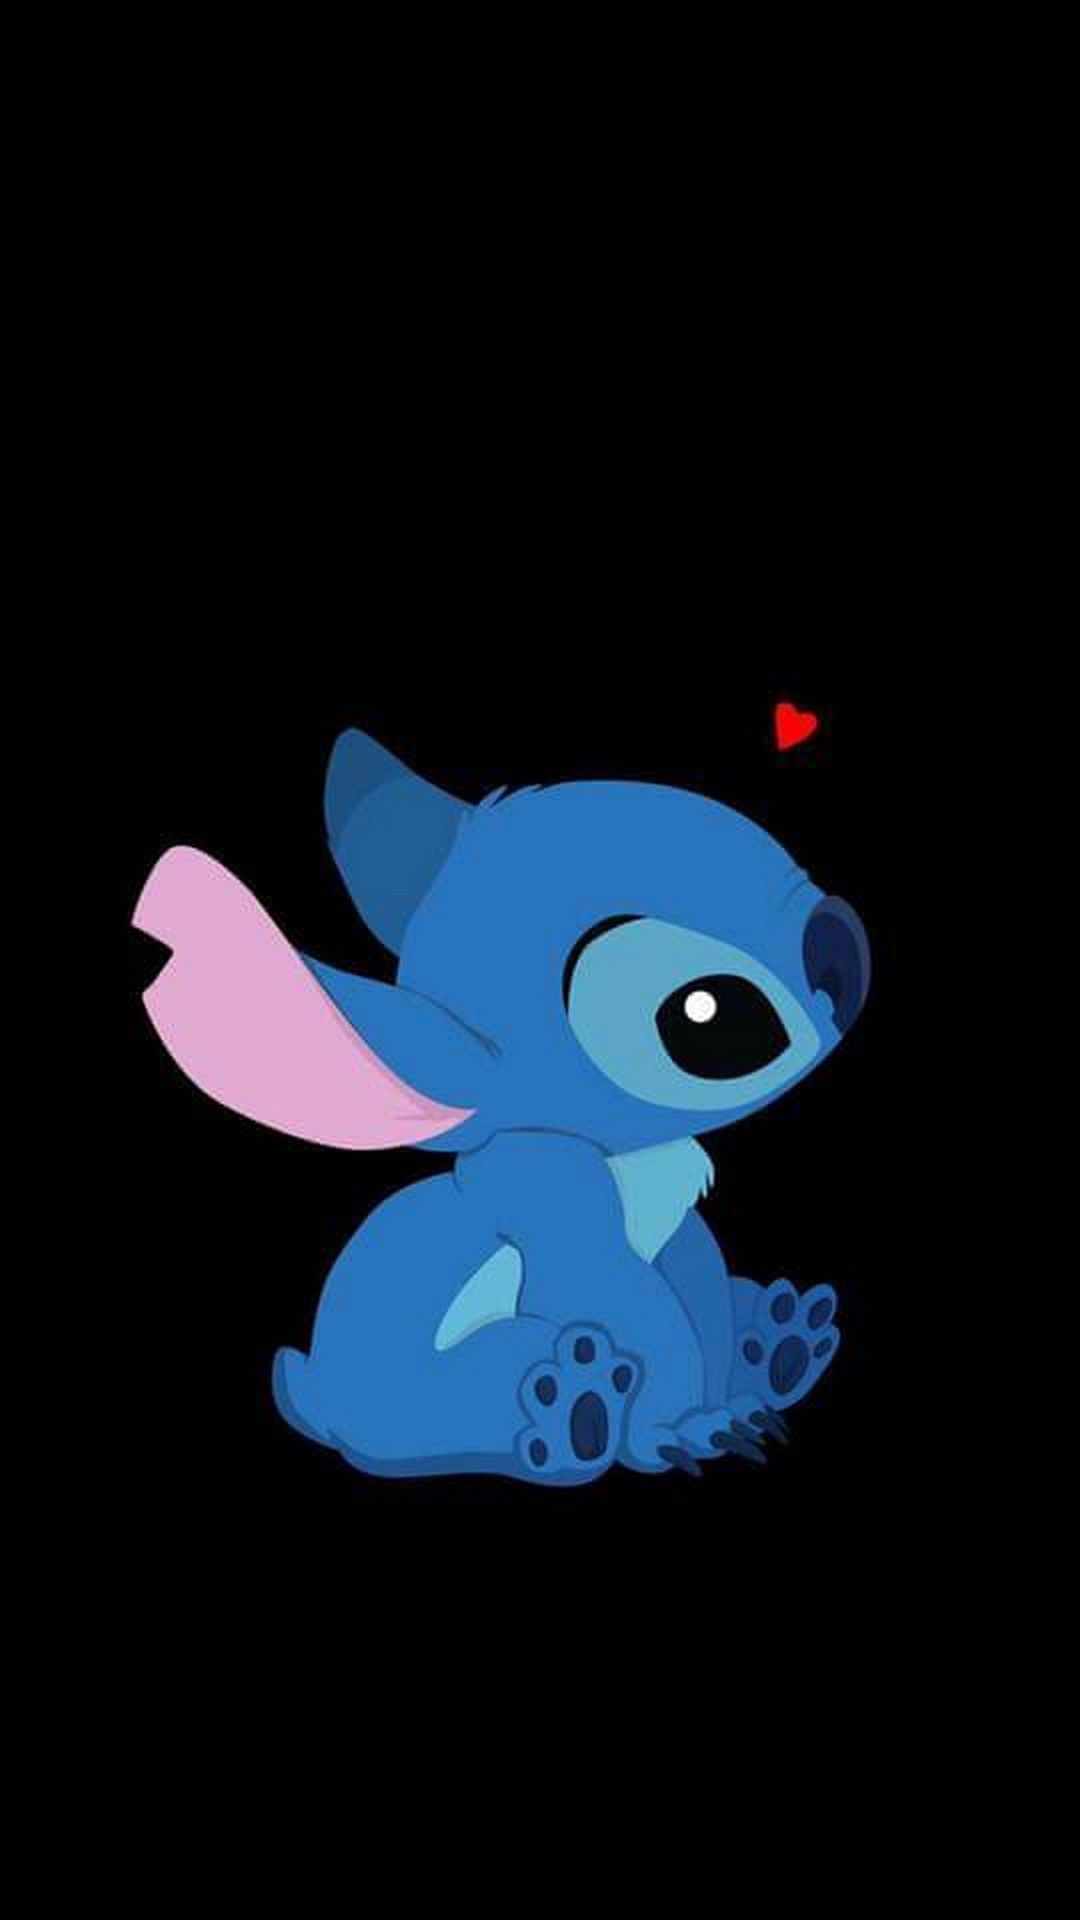 Lilo And Stitch Aesthetic Wallpapers Wallpaper Cave See more ideas about aesthetic lockscreens, aesthetic wallpapers, iphone wallpaper. lilo and stitch aesthetic wallpapers